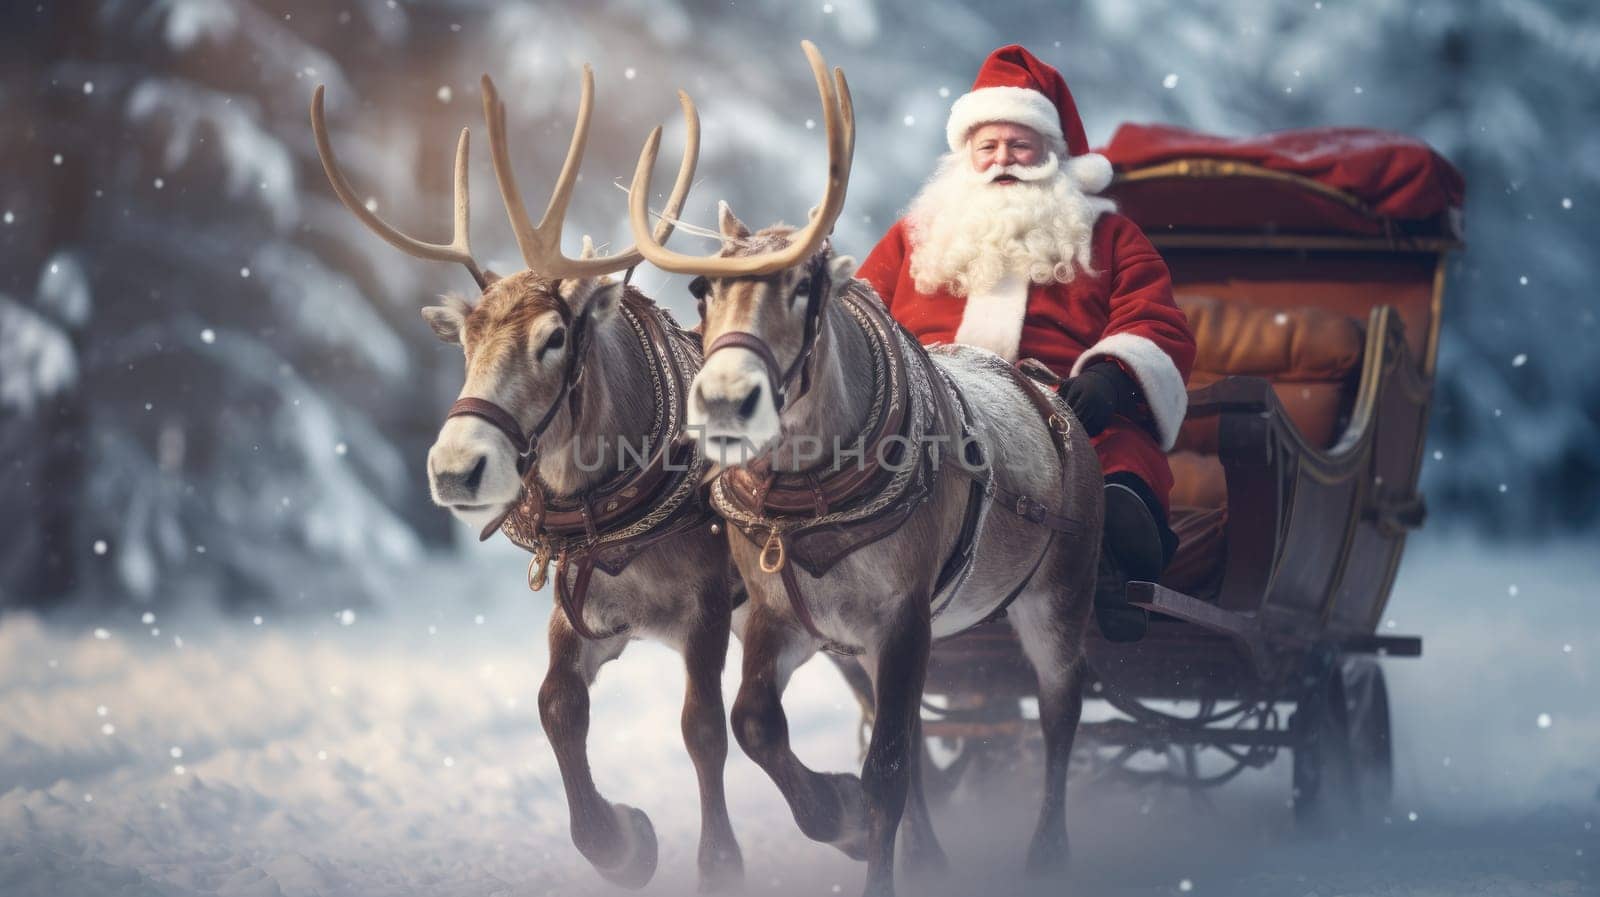 Santa Claus and his sleigh and reindeer rush to childrens homes with presents to celebrate Christmas and the New Year.